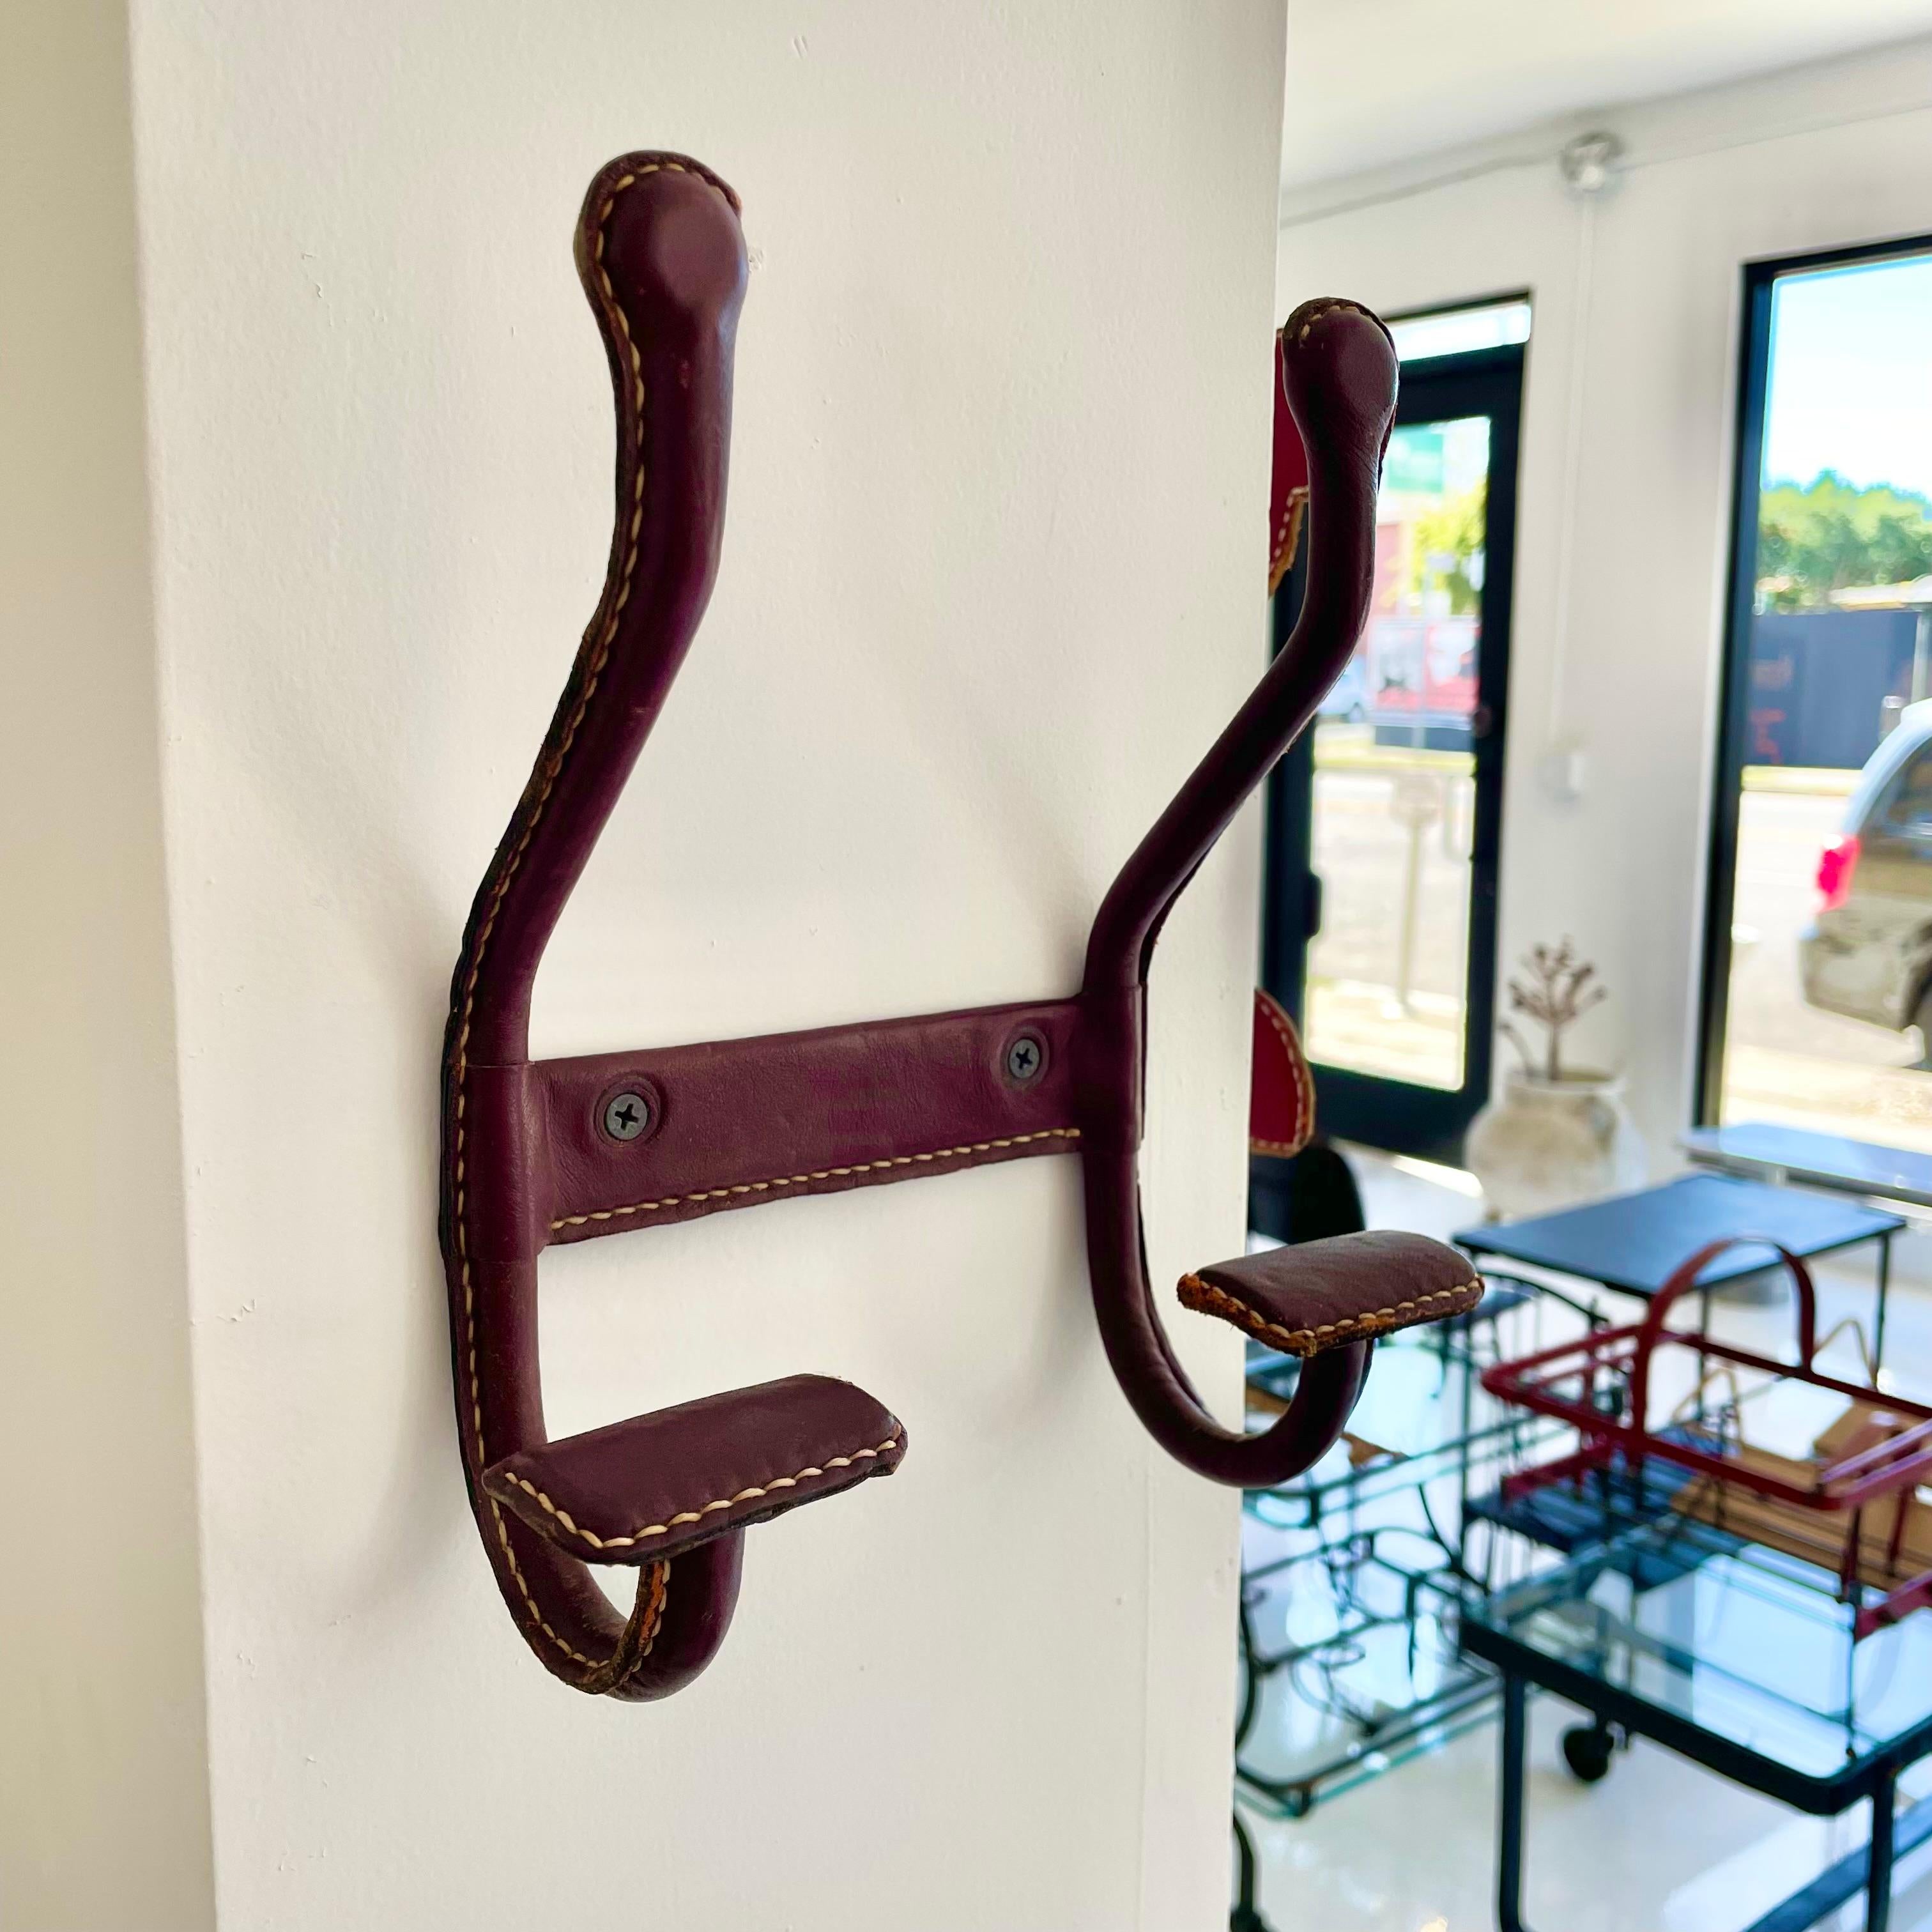 Handsome dual wall hook by French designer Jacques Adnet in a beautiful oxblood leather with light patina. Frame made of solid iron and completely wrapped in leather. Every seam is stitched with Adnet's signature contrast stitching. Held on to the